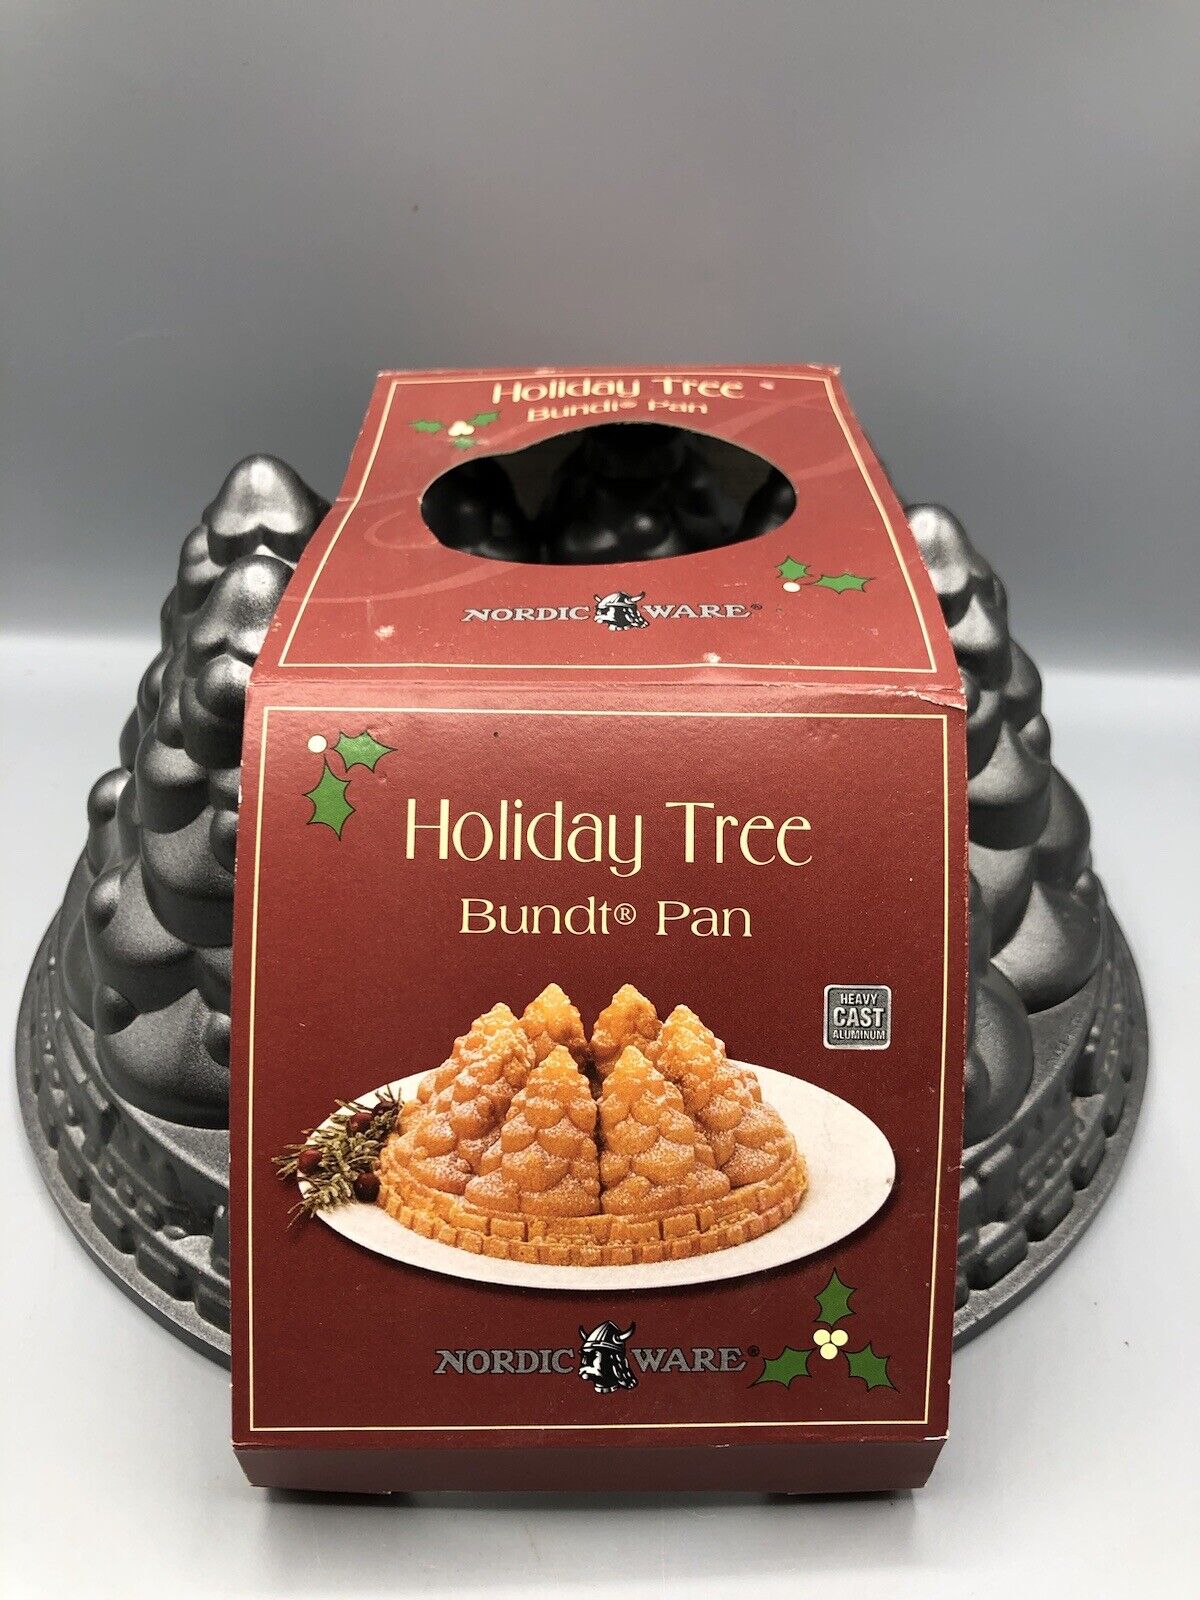 Nordic Ware Holiday Christmas Tree Bundt Cake Baking Pan 10 Cup Made in USA